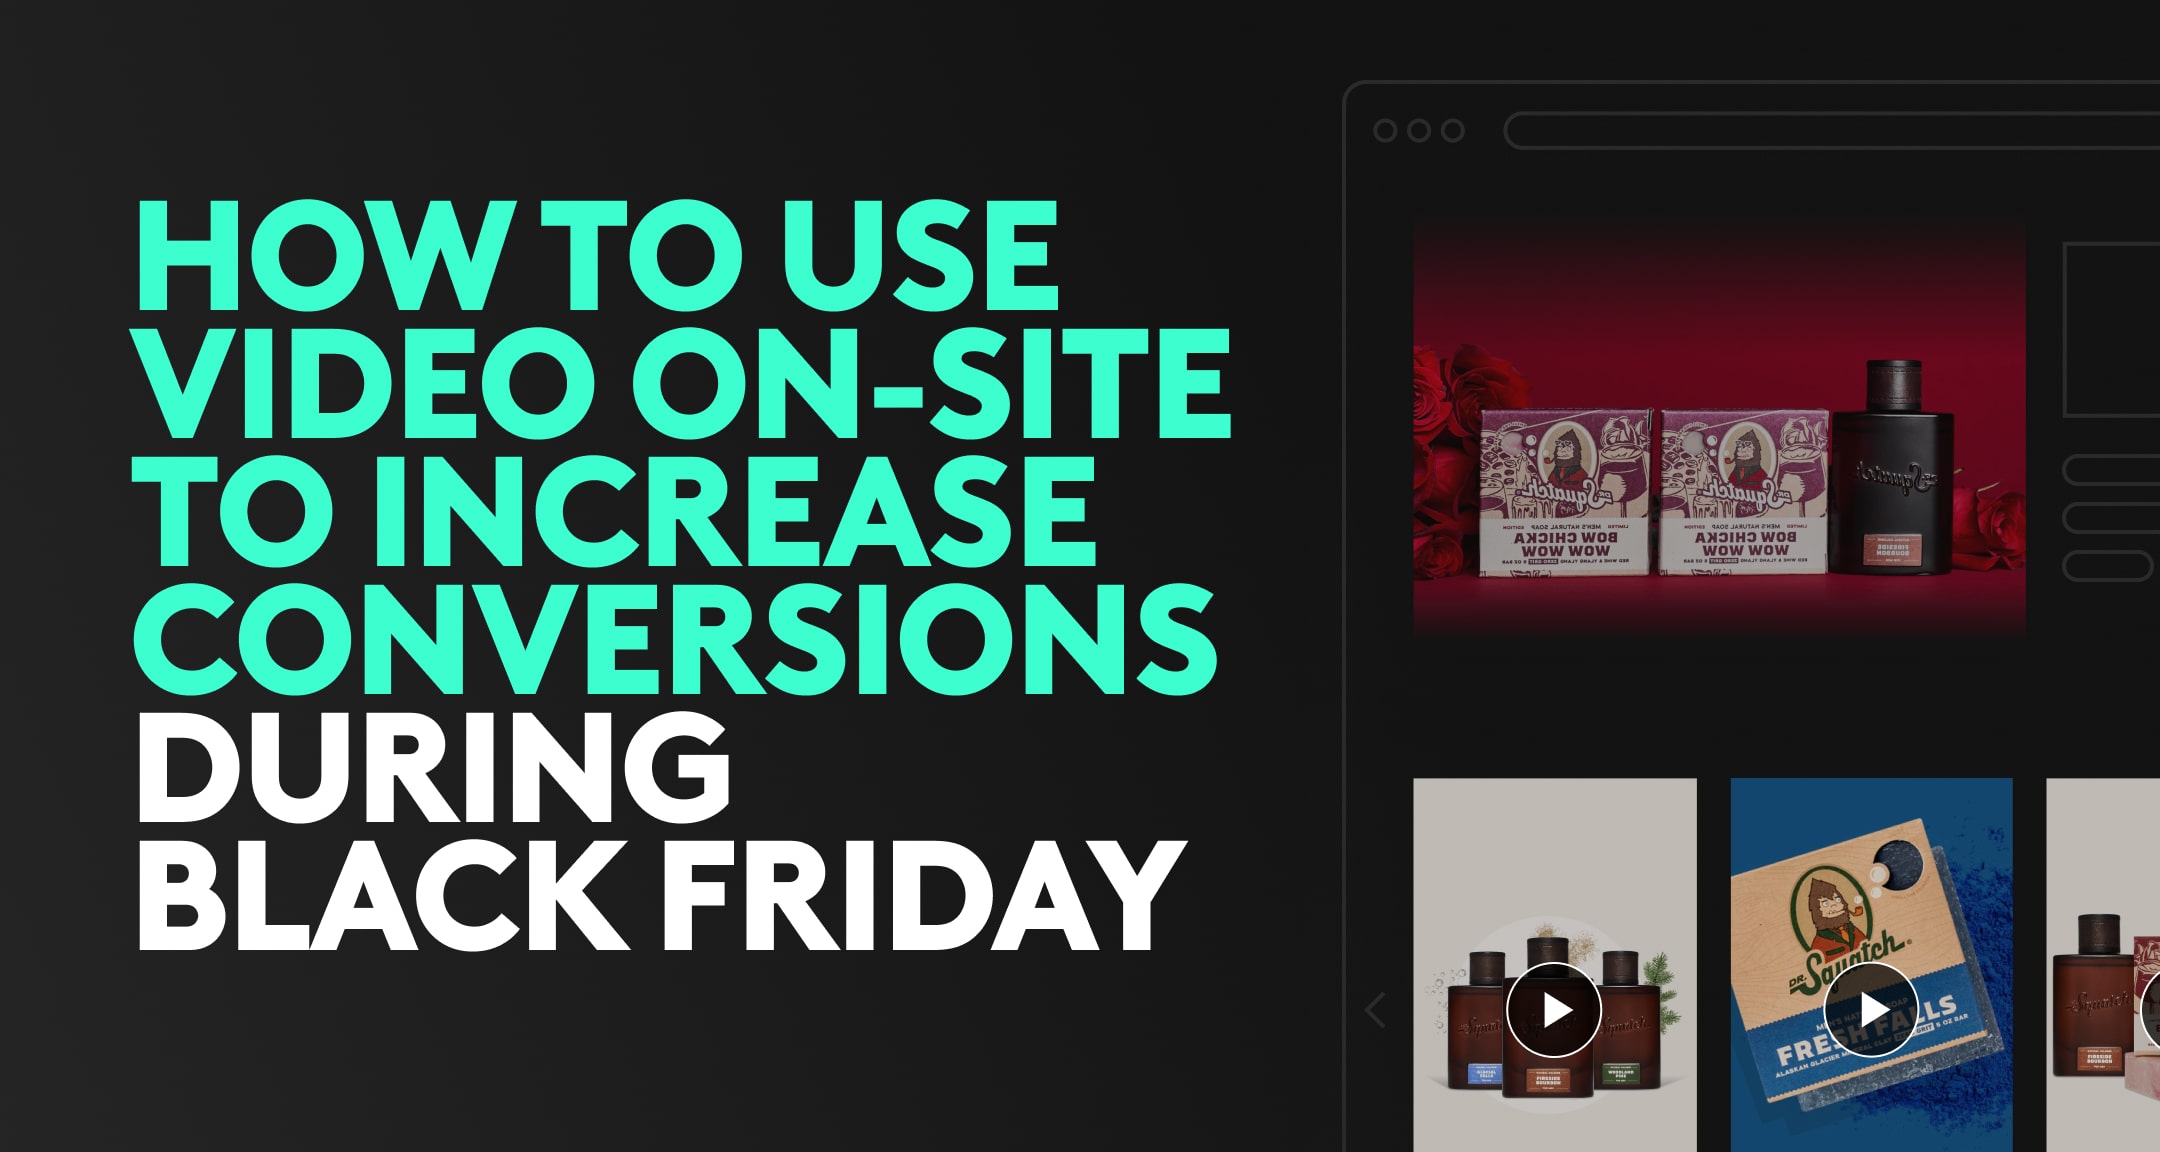 How to Use Video On-Site to Increase Conversions During Black Friday